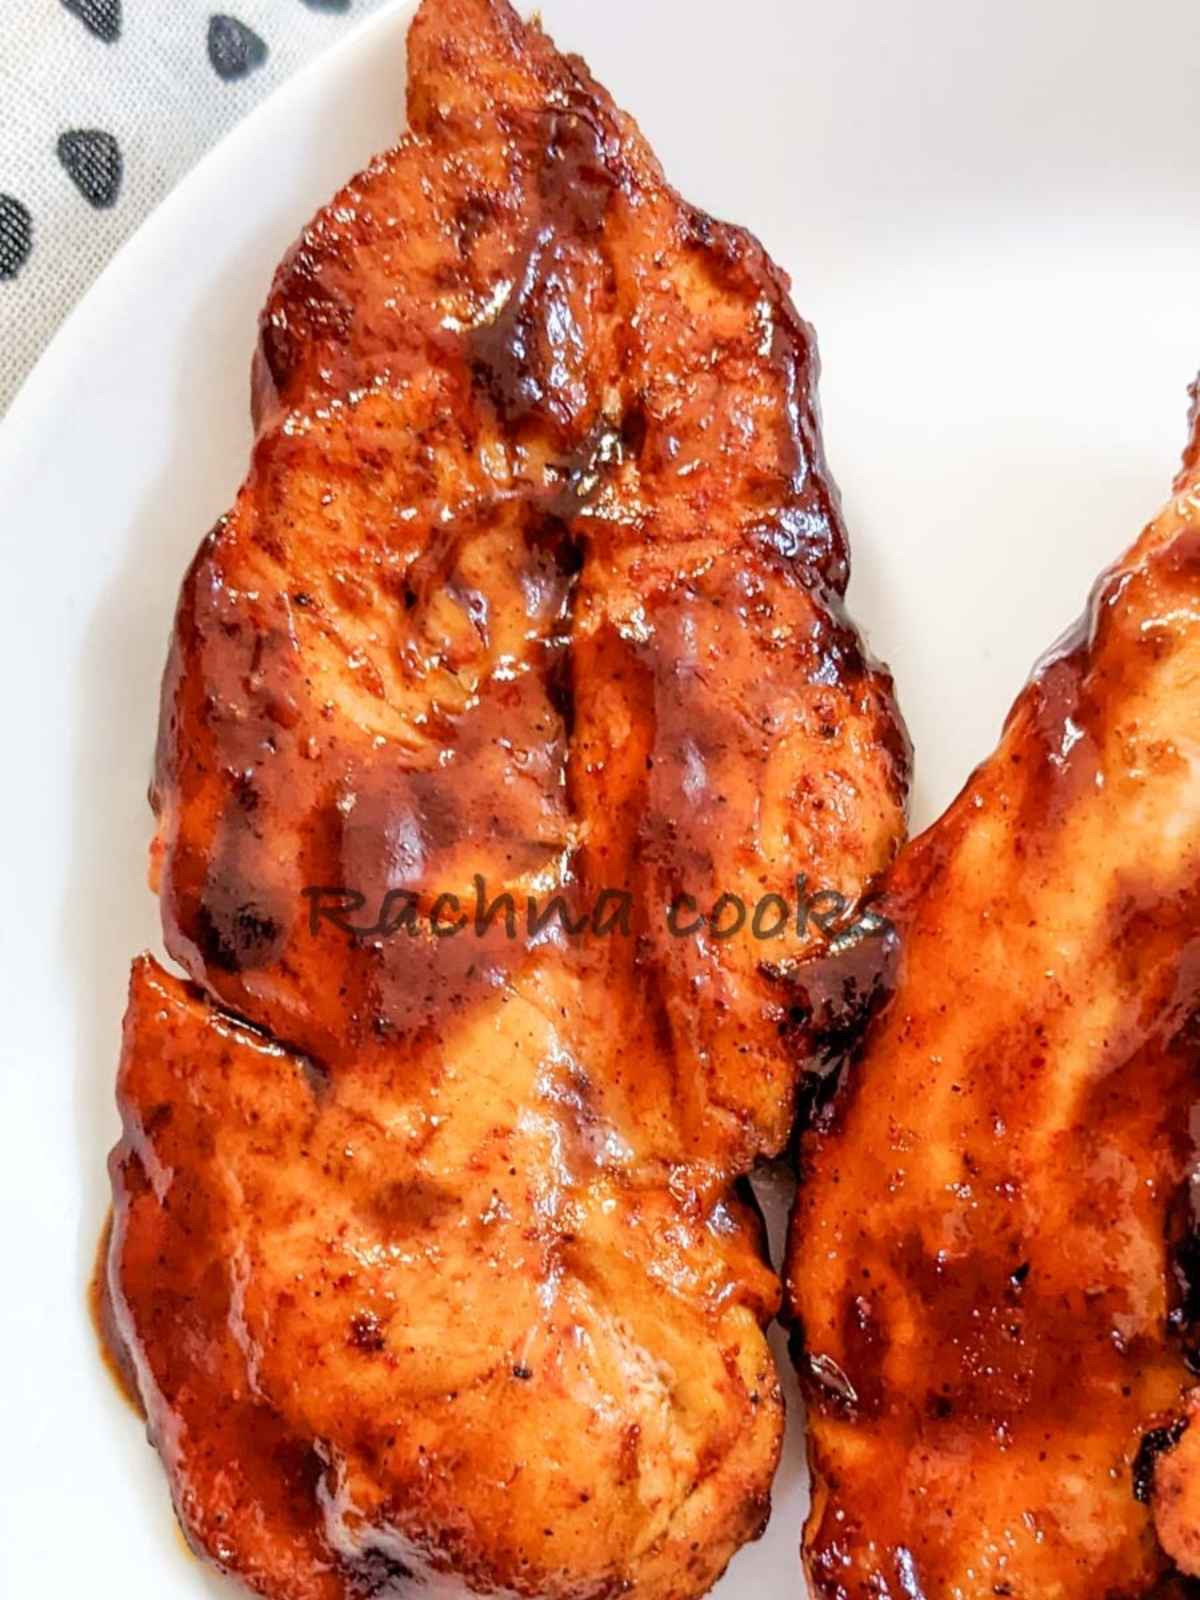 Close up of BBQ chicken breast on a white plate.